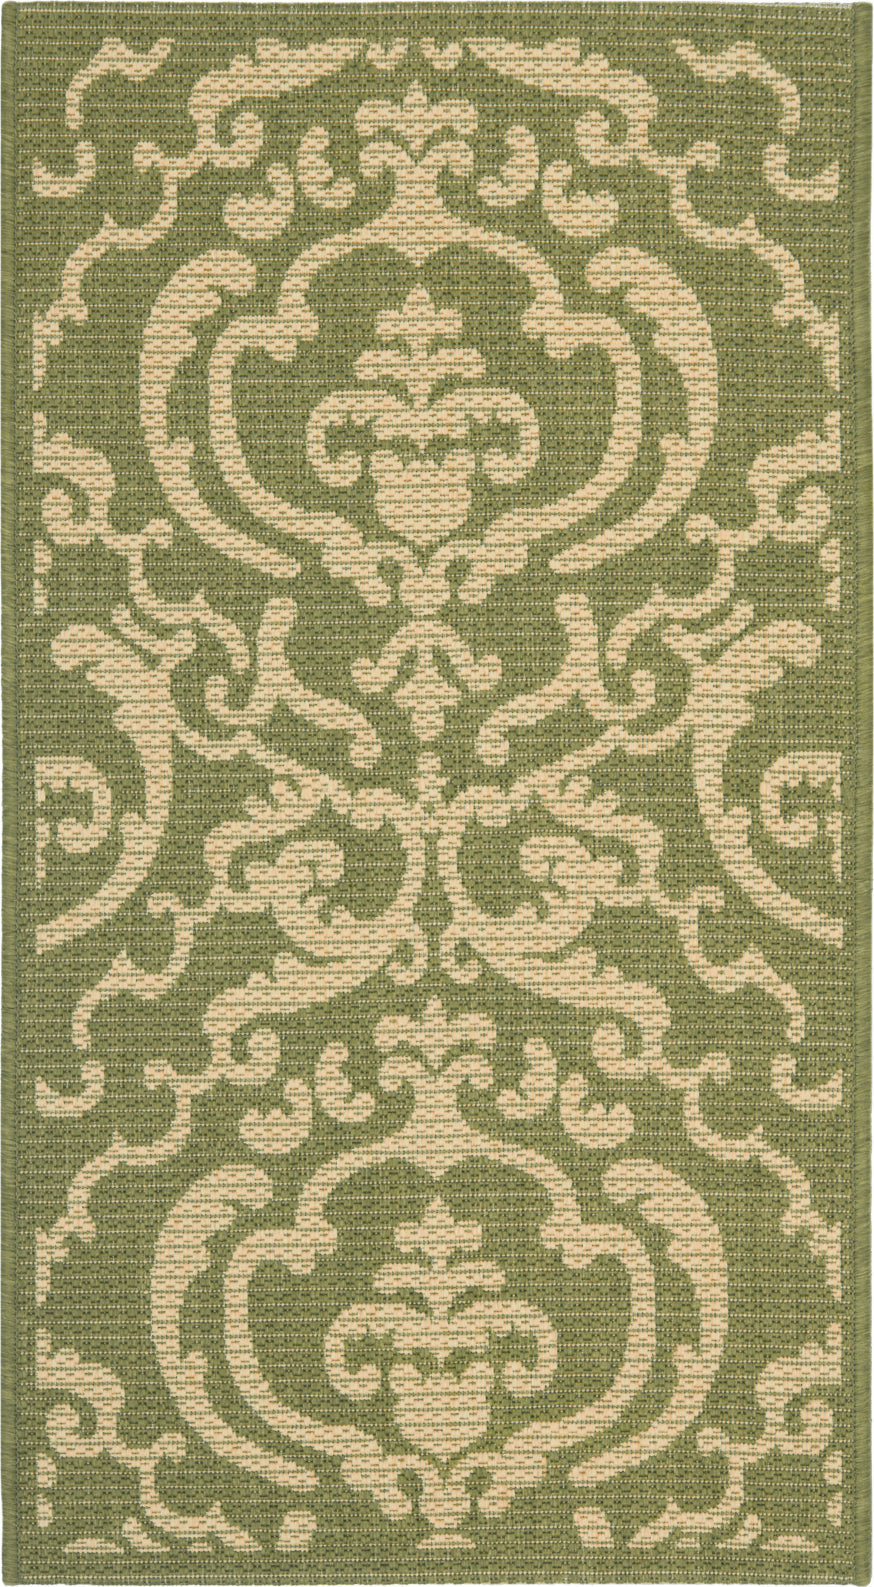 Safavieh Courtyard CY2663 Olive/Natural Area Rug main image